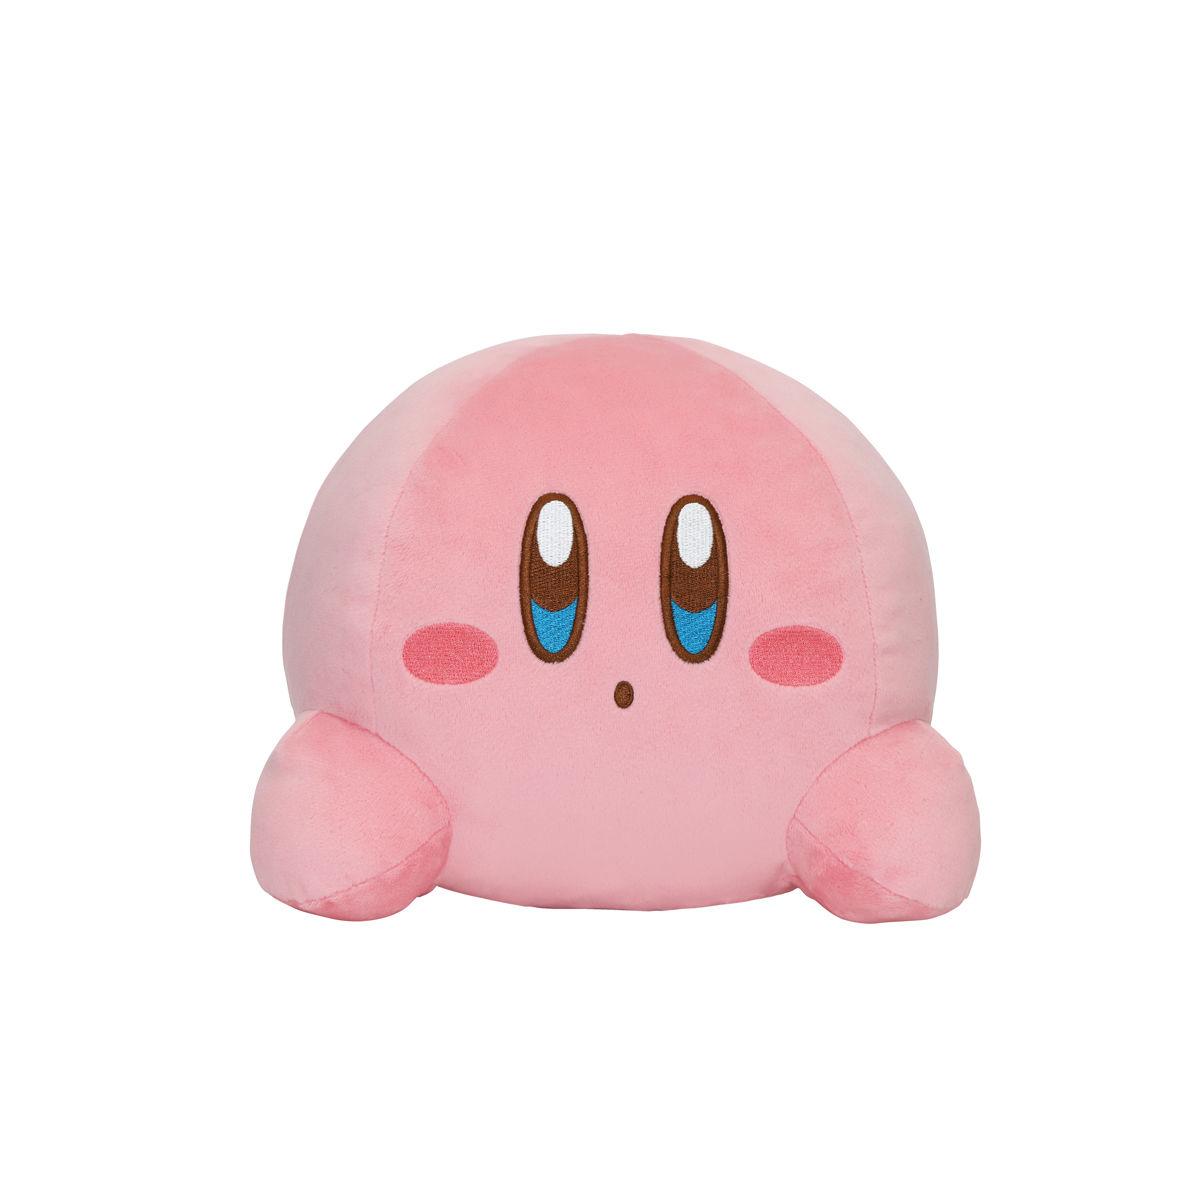 kirby action figures toys